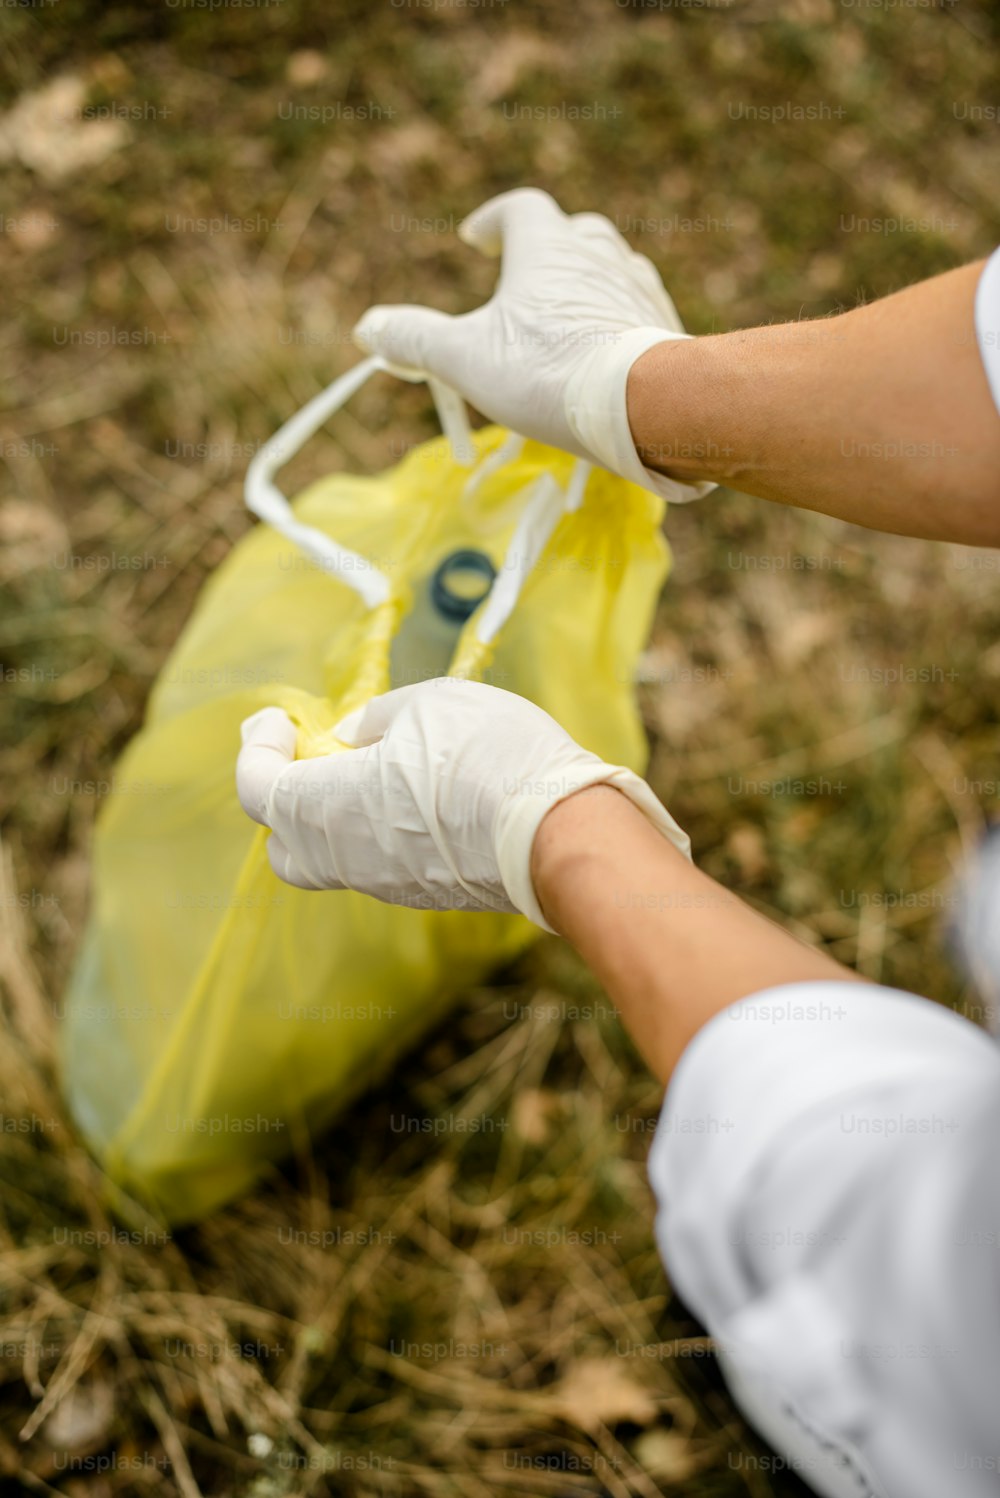 a person in white gloves holding a yellow bag